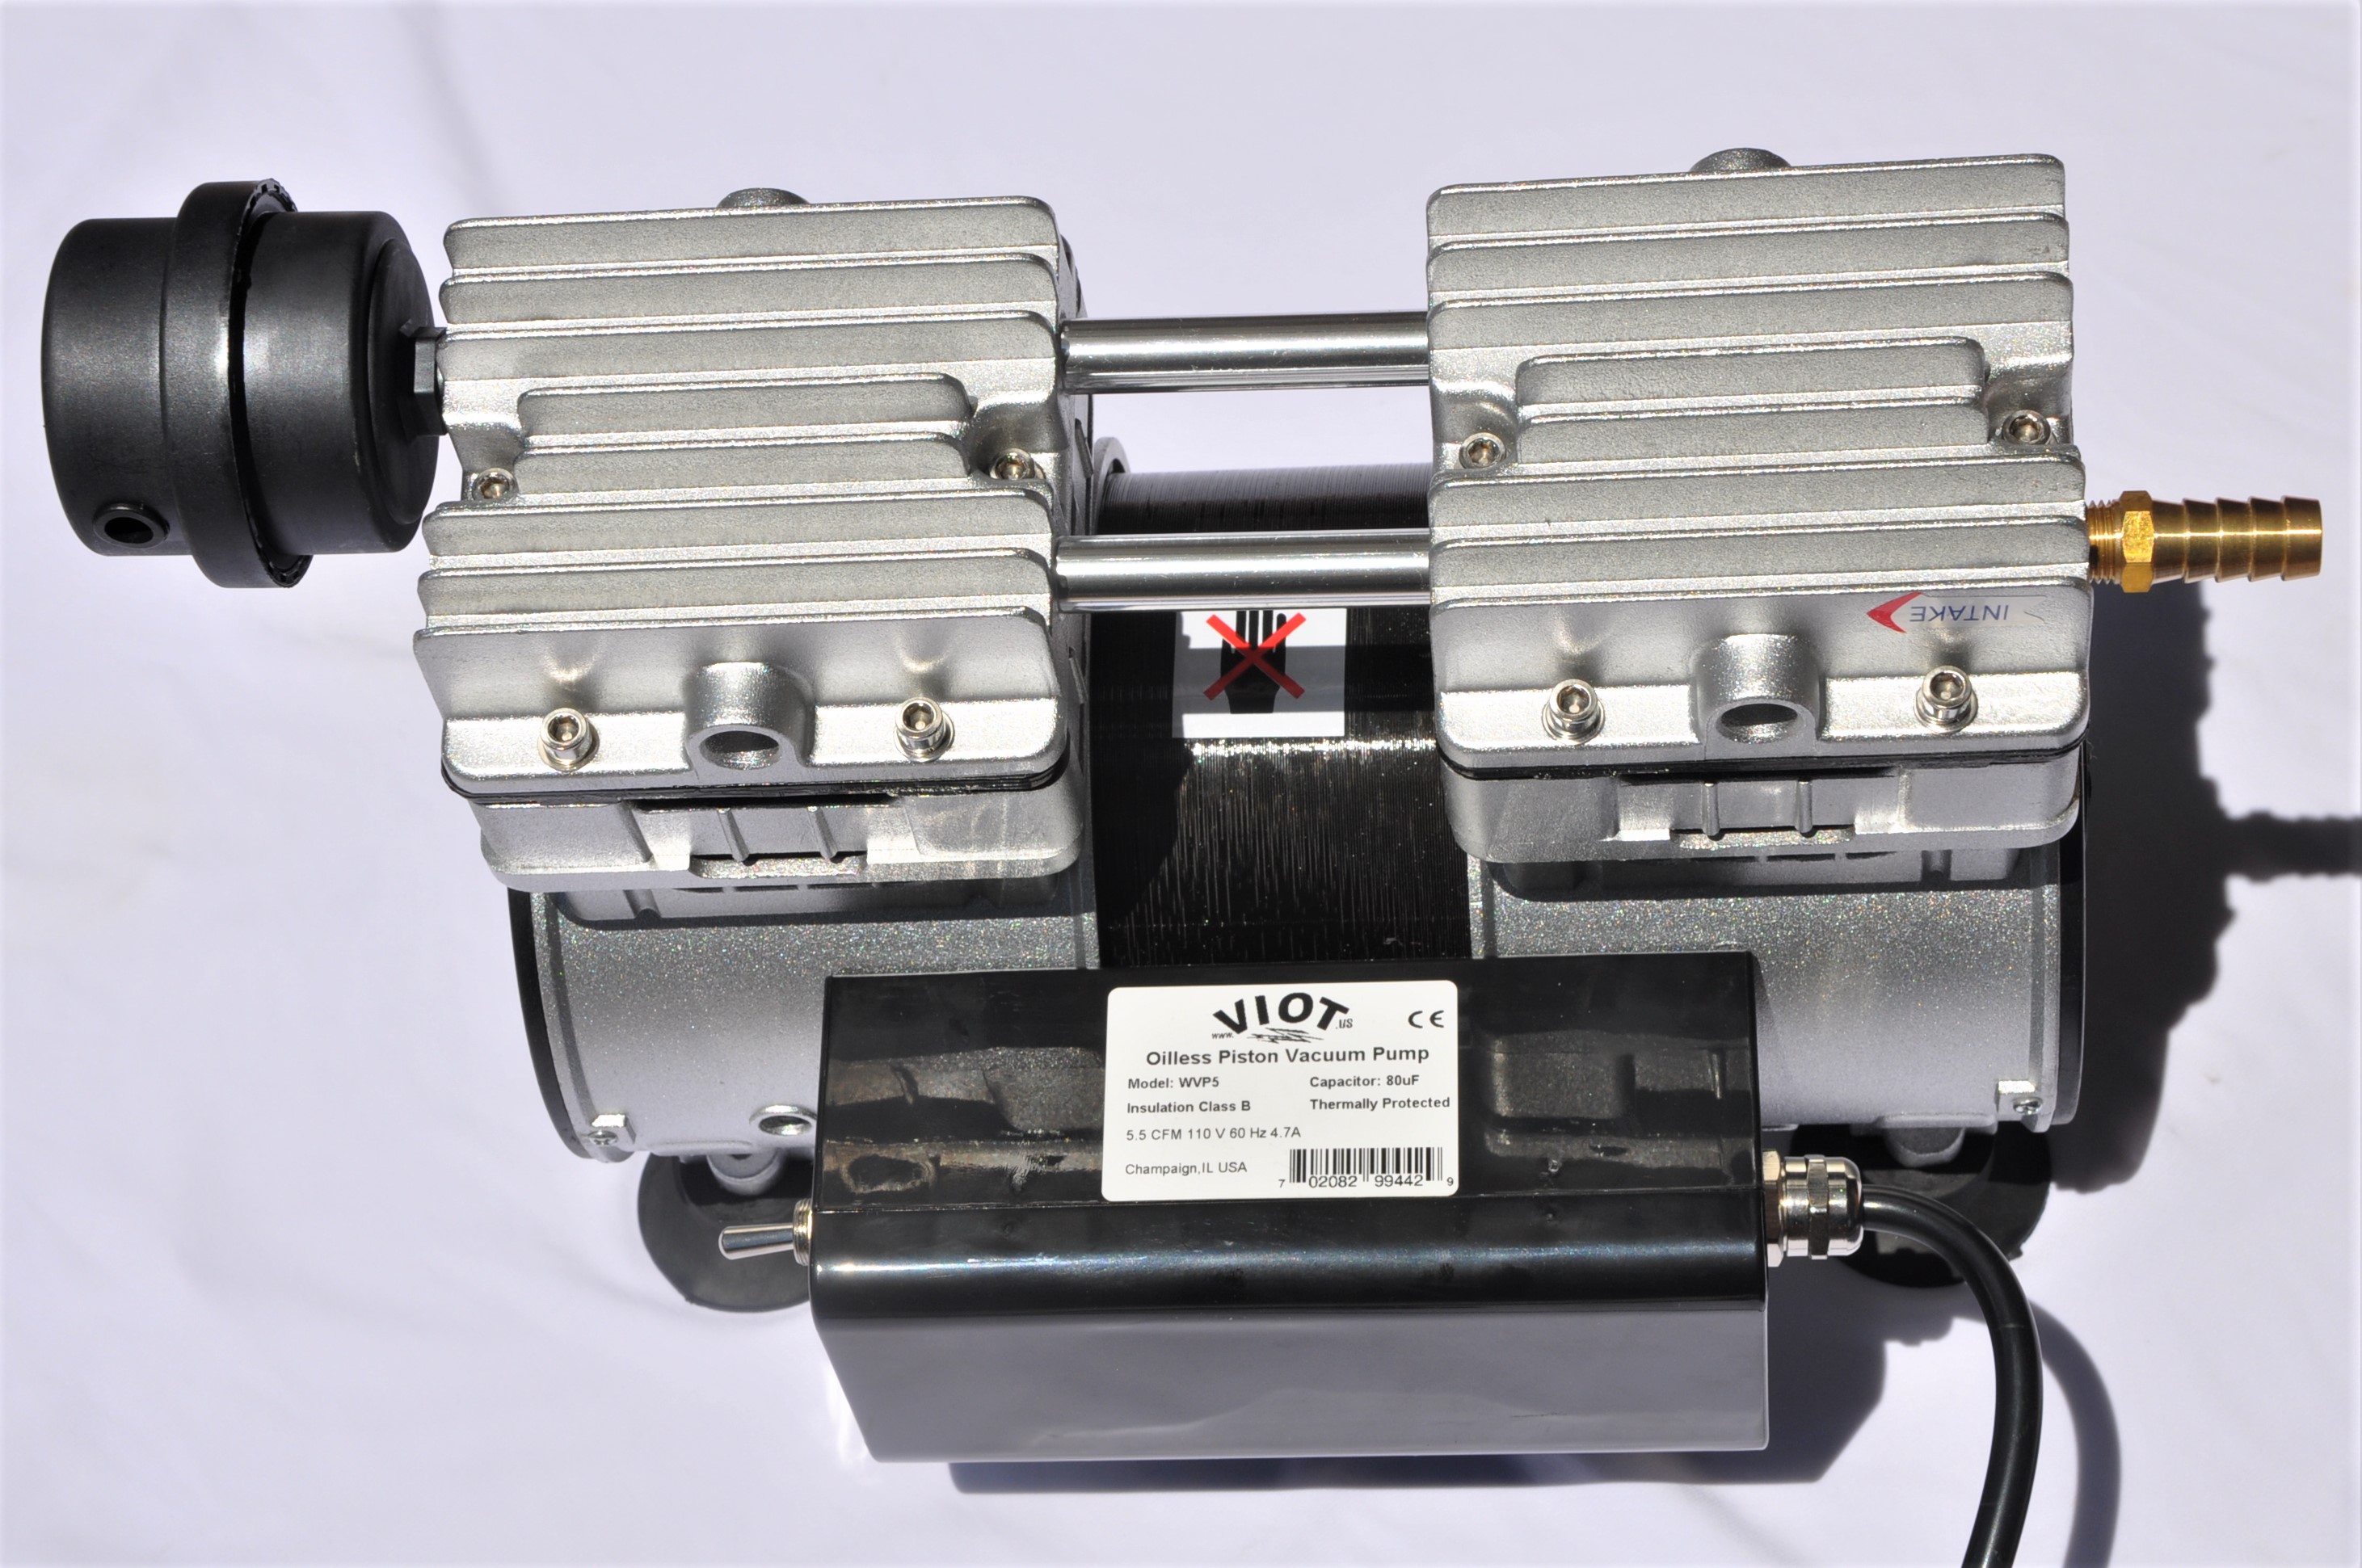 1: WVP5: Twin Piston Oil-less Vacuum Pump 5.5 CFM Good for 1 cow or dual Goat Milker Hookup Science Lab and Workshop Jobs, Add-On?